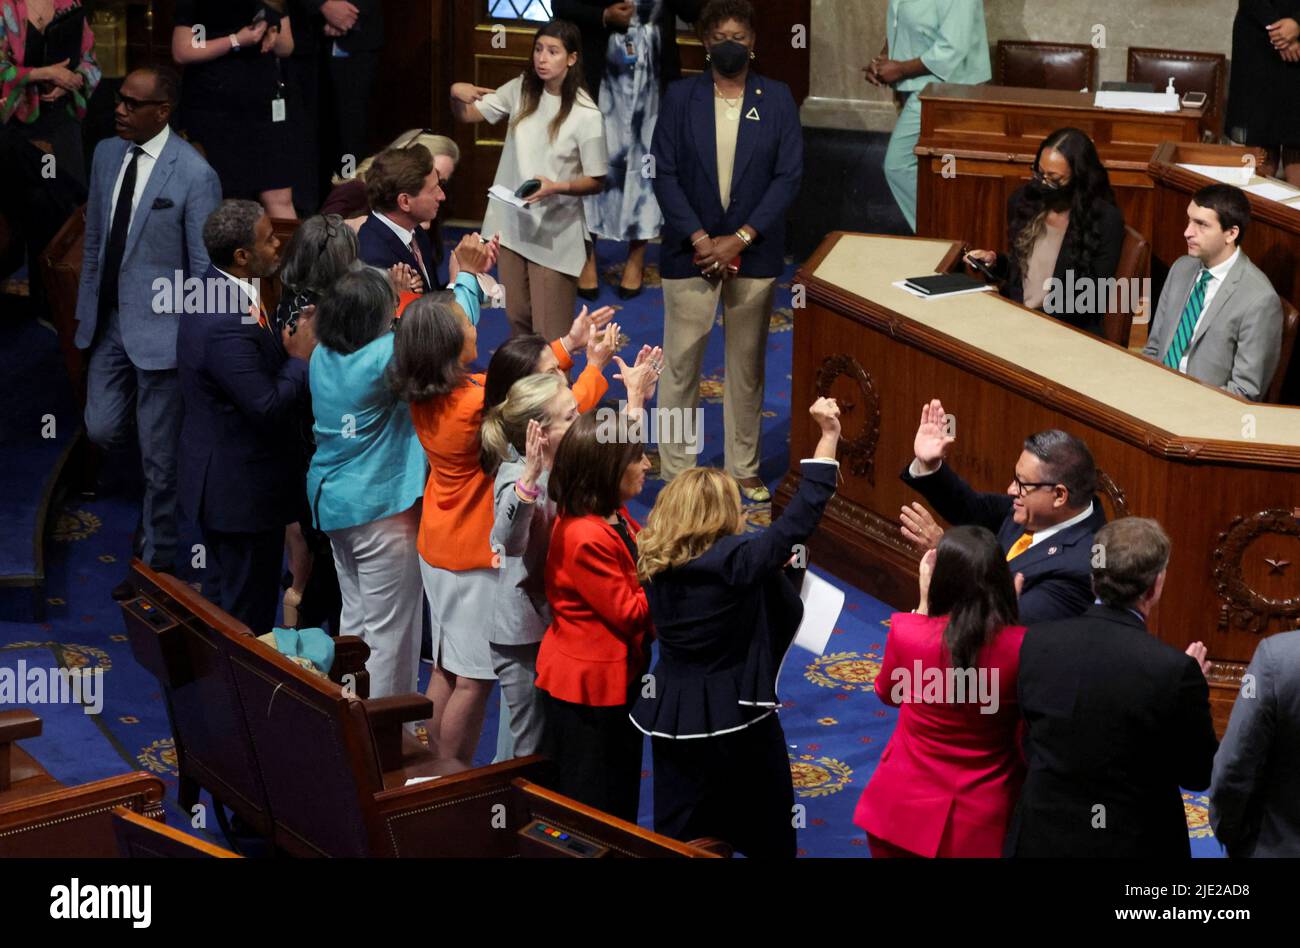 U.S. House of Representatives Democrats celebrate after passing of the 'Bipartisan Safer Communities Act' gun safety legislation already passed by the U.S. Senate during a final vote in the House Chamber on Capitol Hill in Washington, June 24, 2022.  REUTERS/Jim Bourg Stock Photo